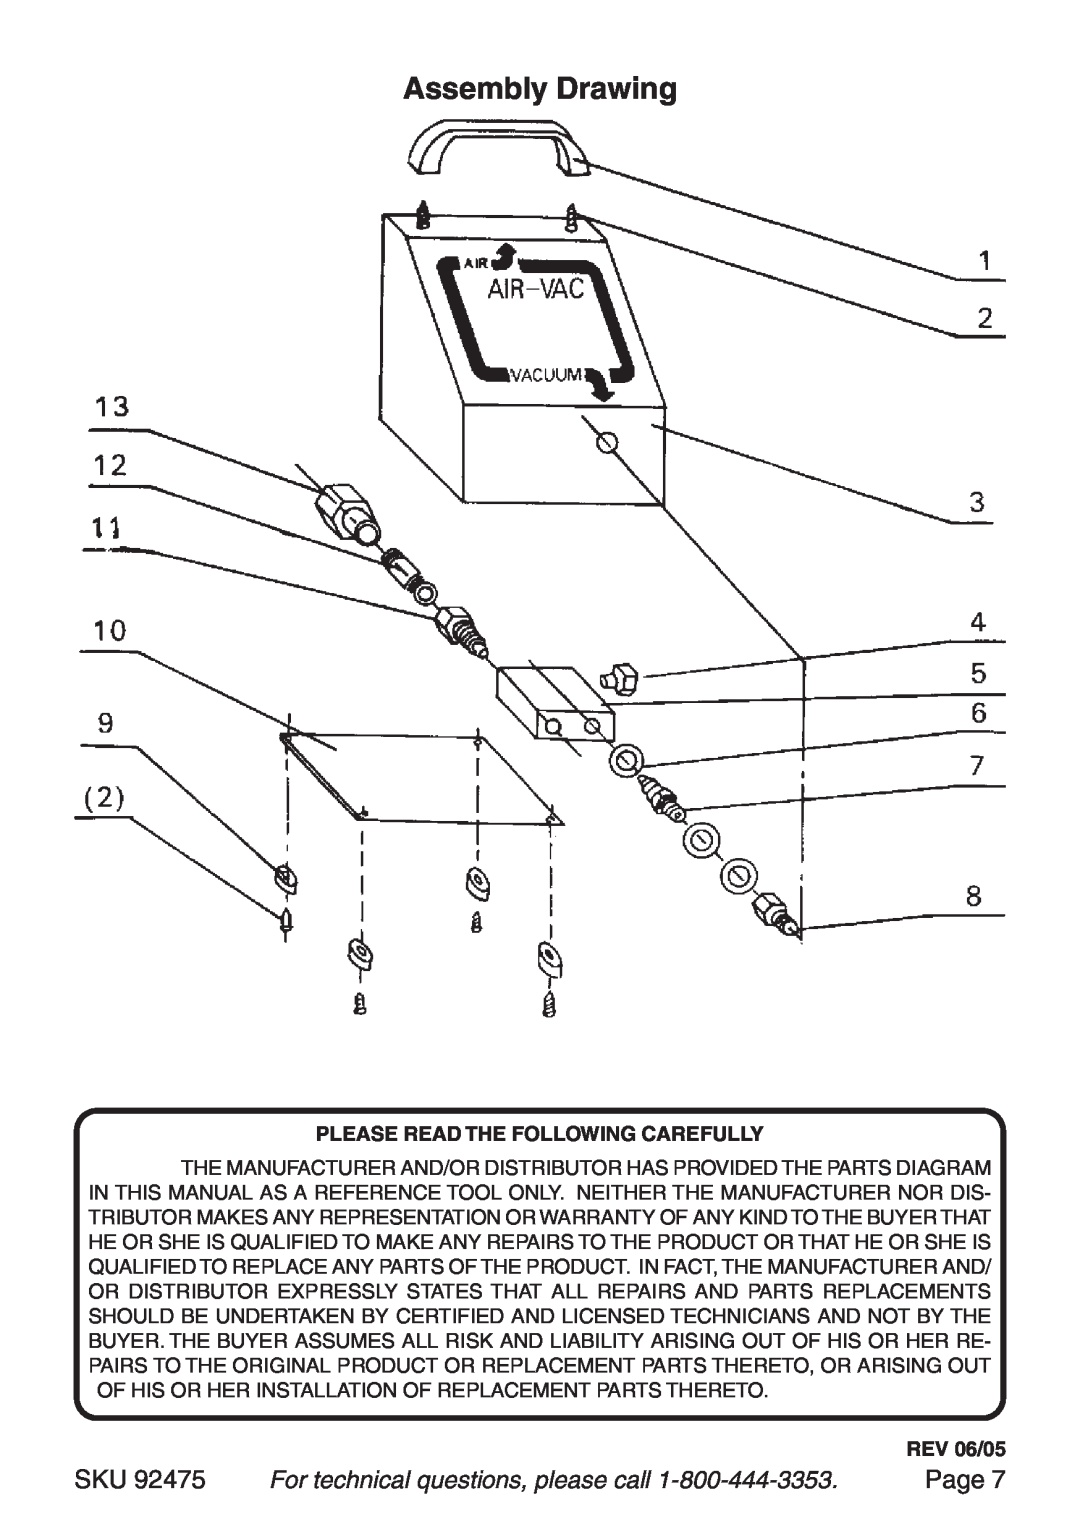 Harbor Freight Tools 92475 Assembly Drawing, For technical questions, please call, Please Read The Following Carefully 